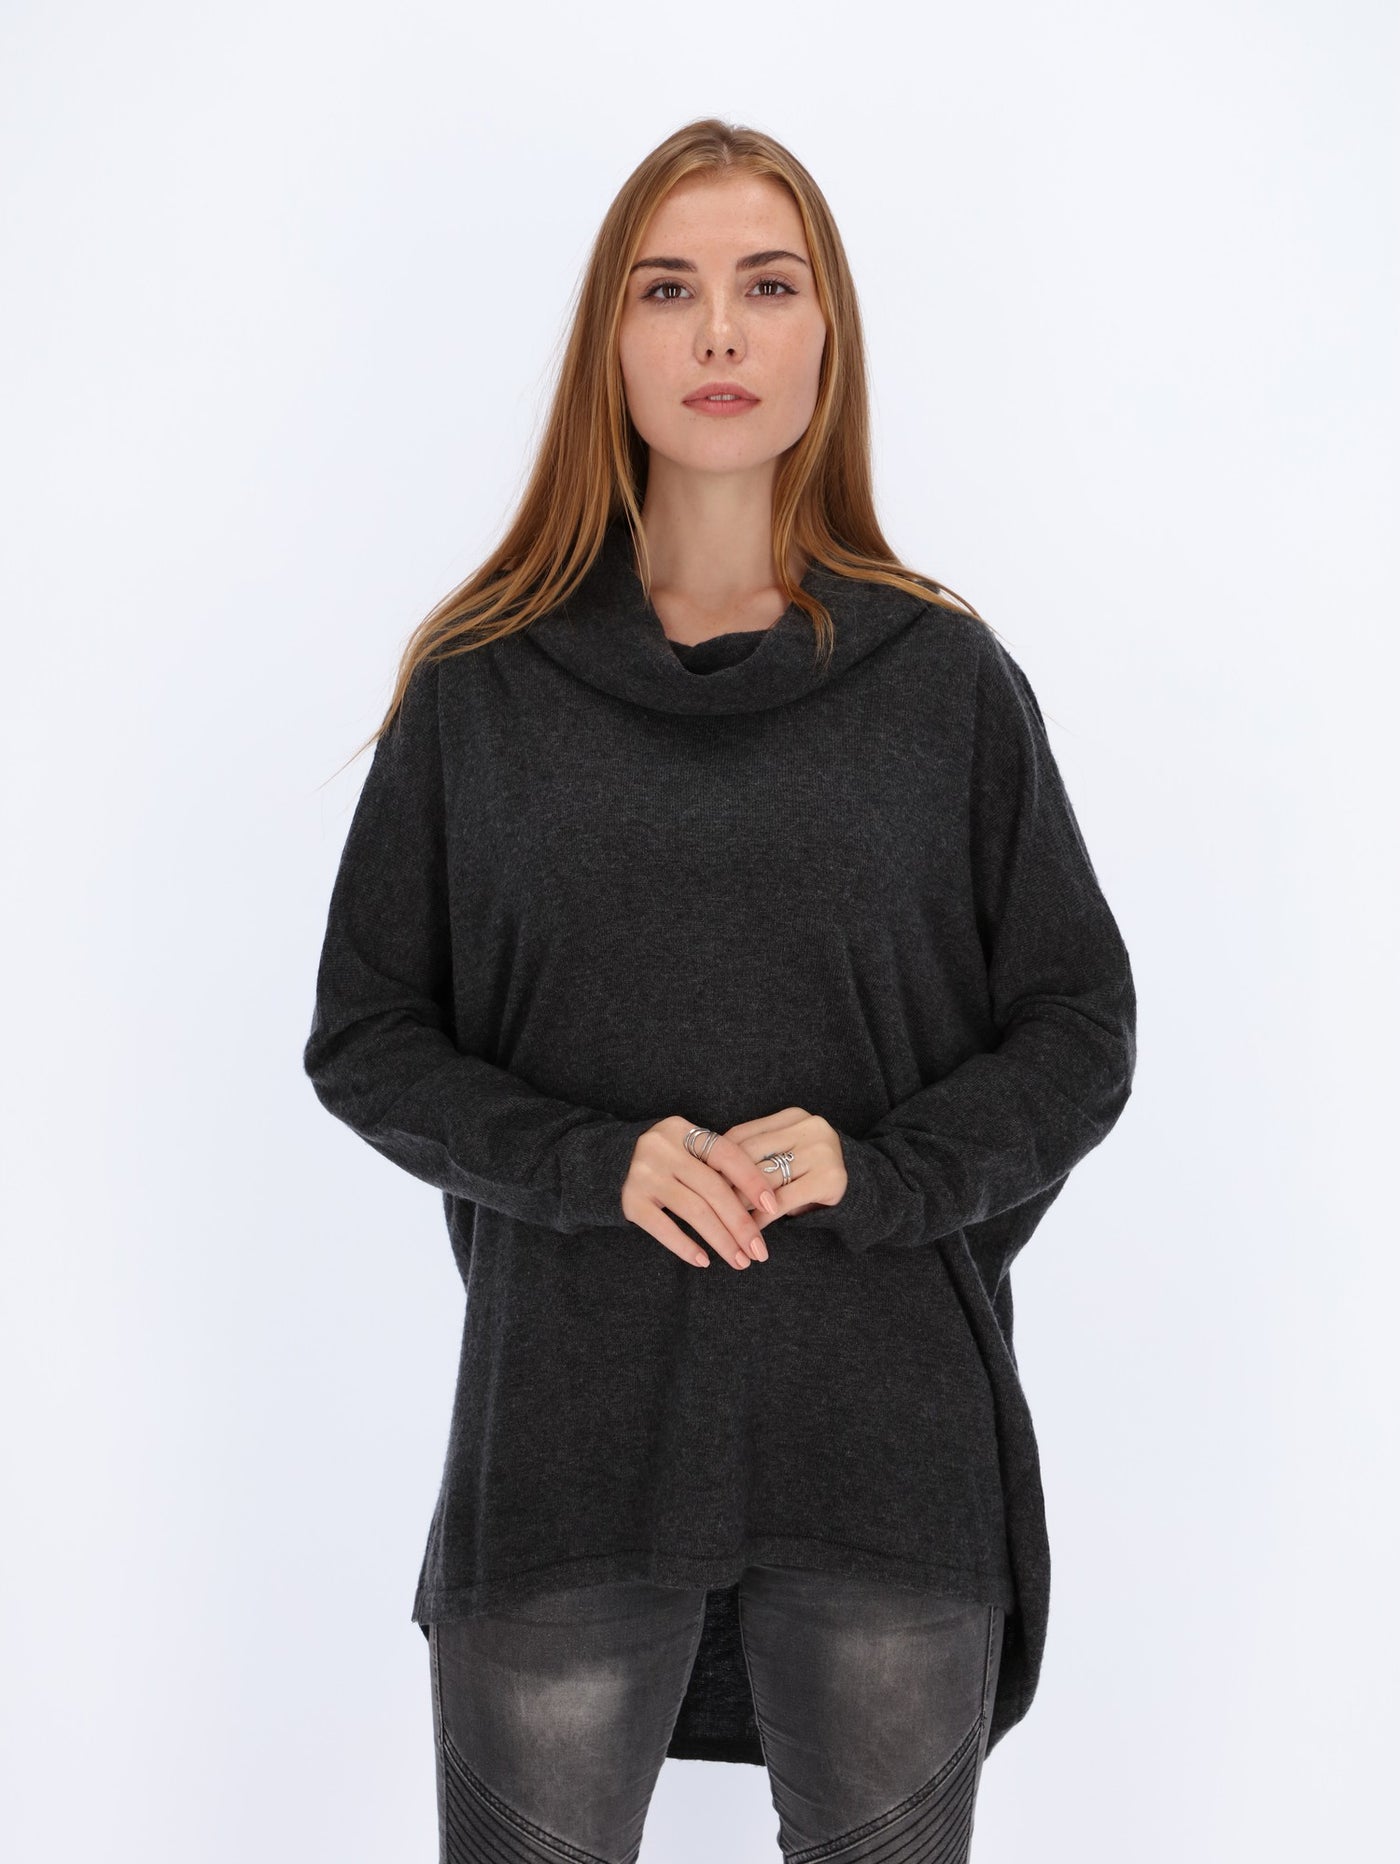 Asymmetric Loose Fit Sweater with Turtleneck